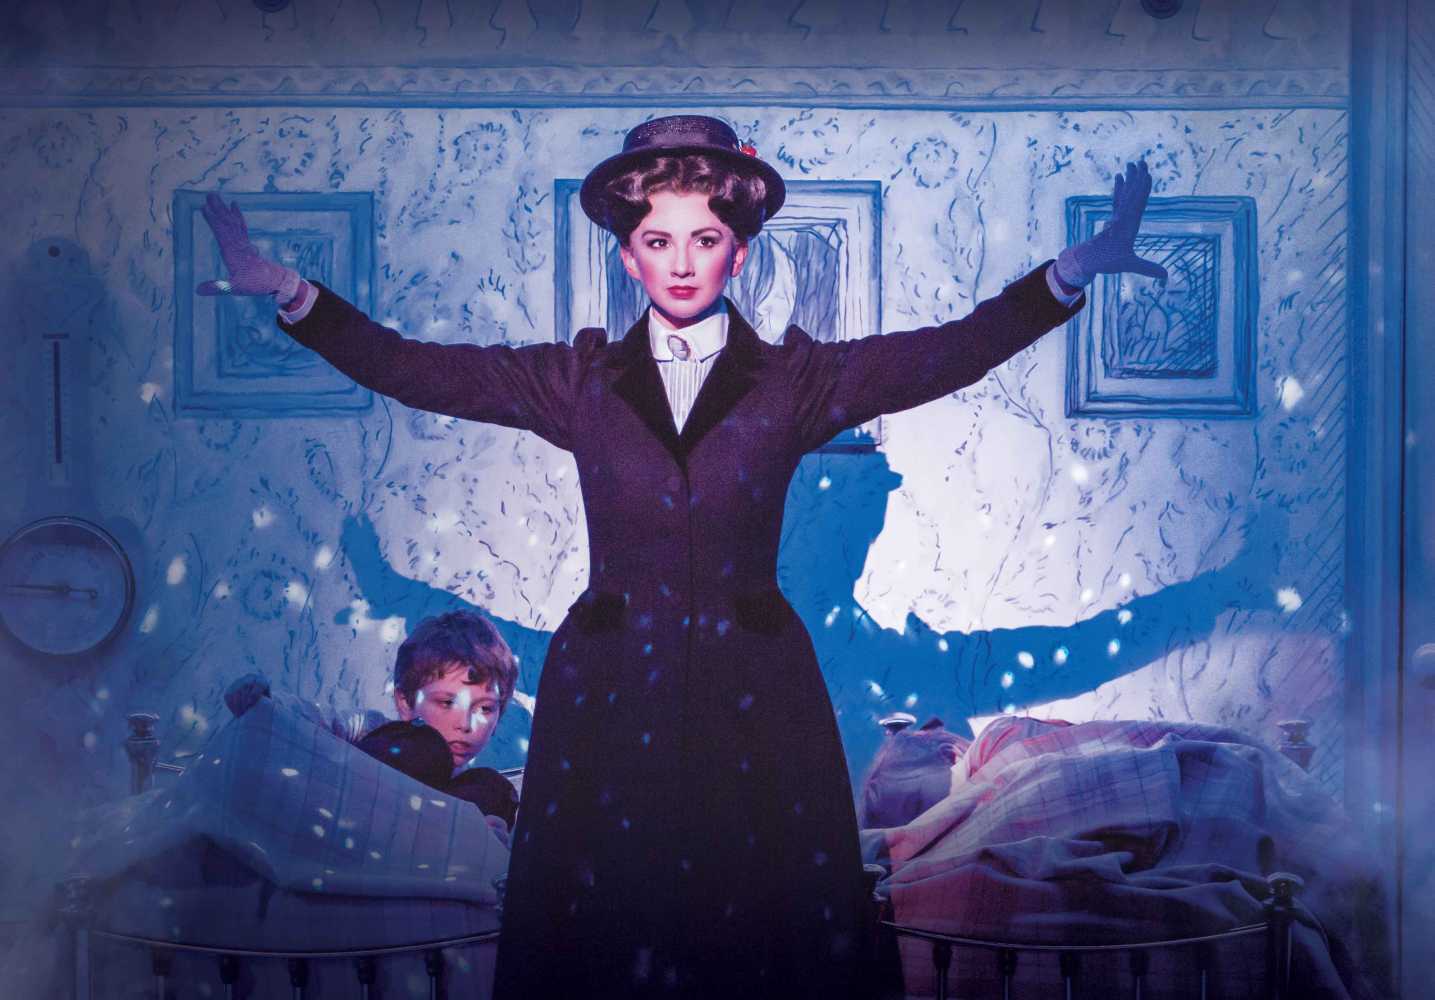 Mary Poppins will hang up her umbrella when the curtain goes down at the Dubai Opera House